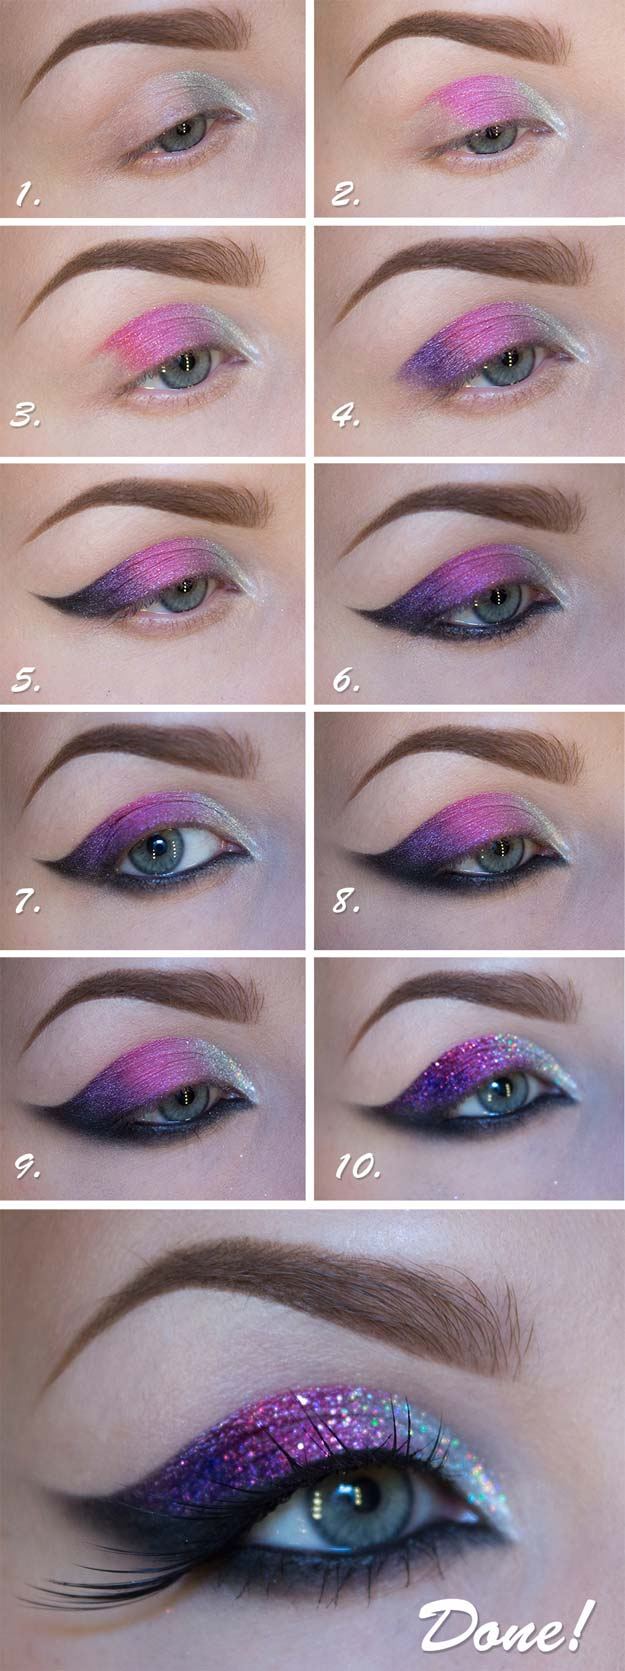 Eye Makeup Purple And Silver 38 Makeup Ideas For Prom The Goddess